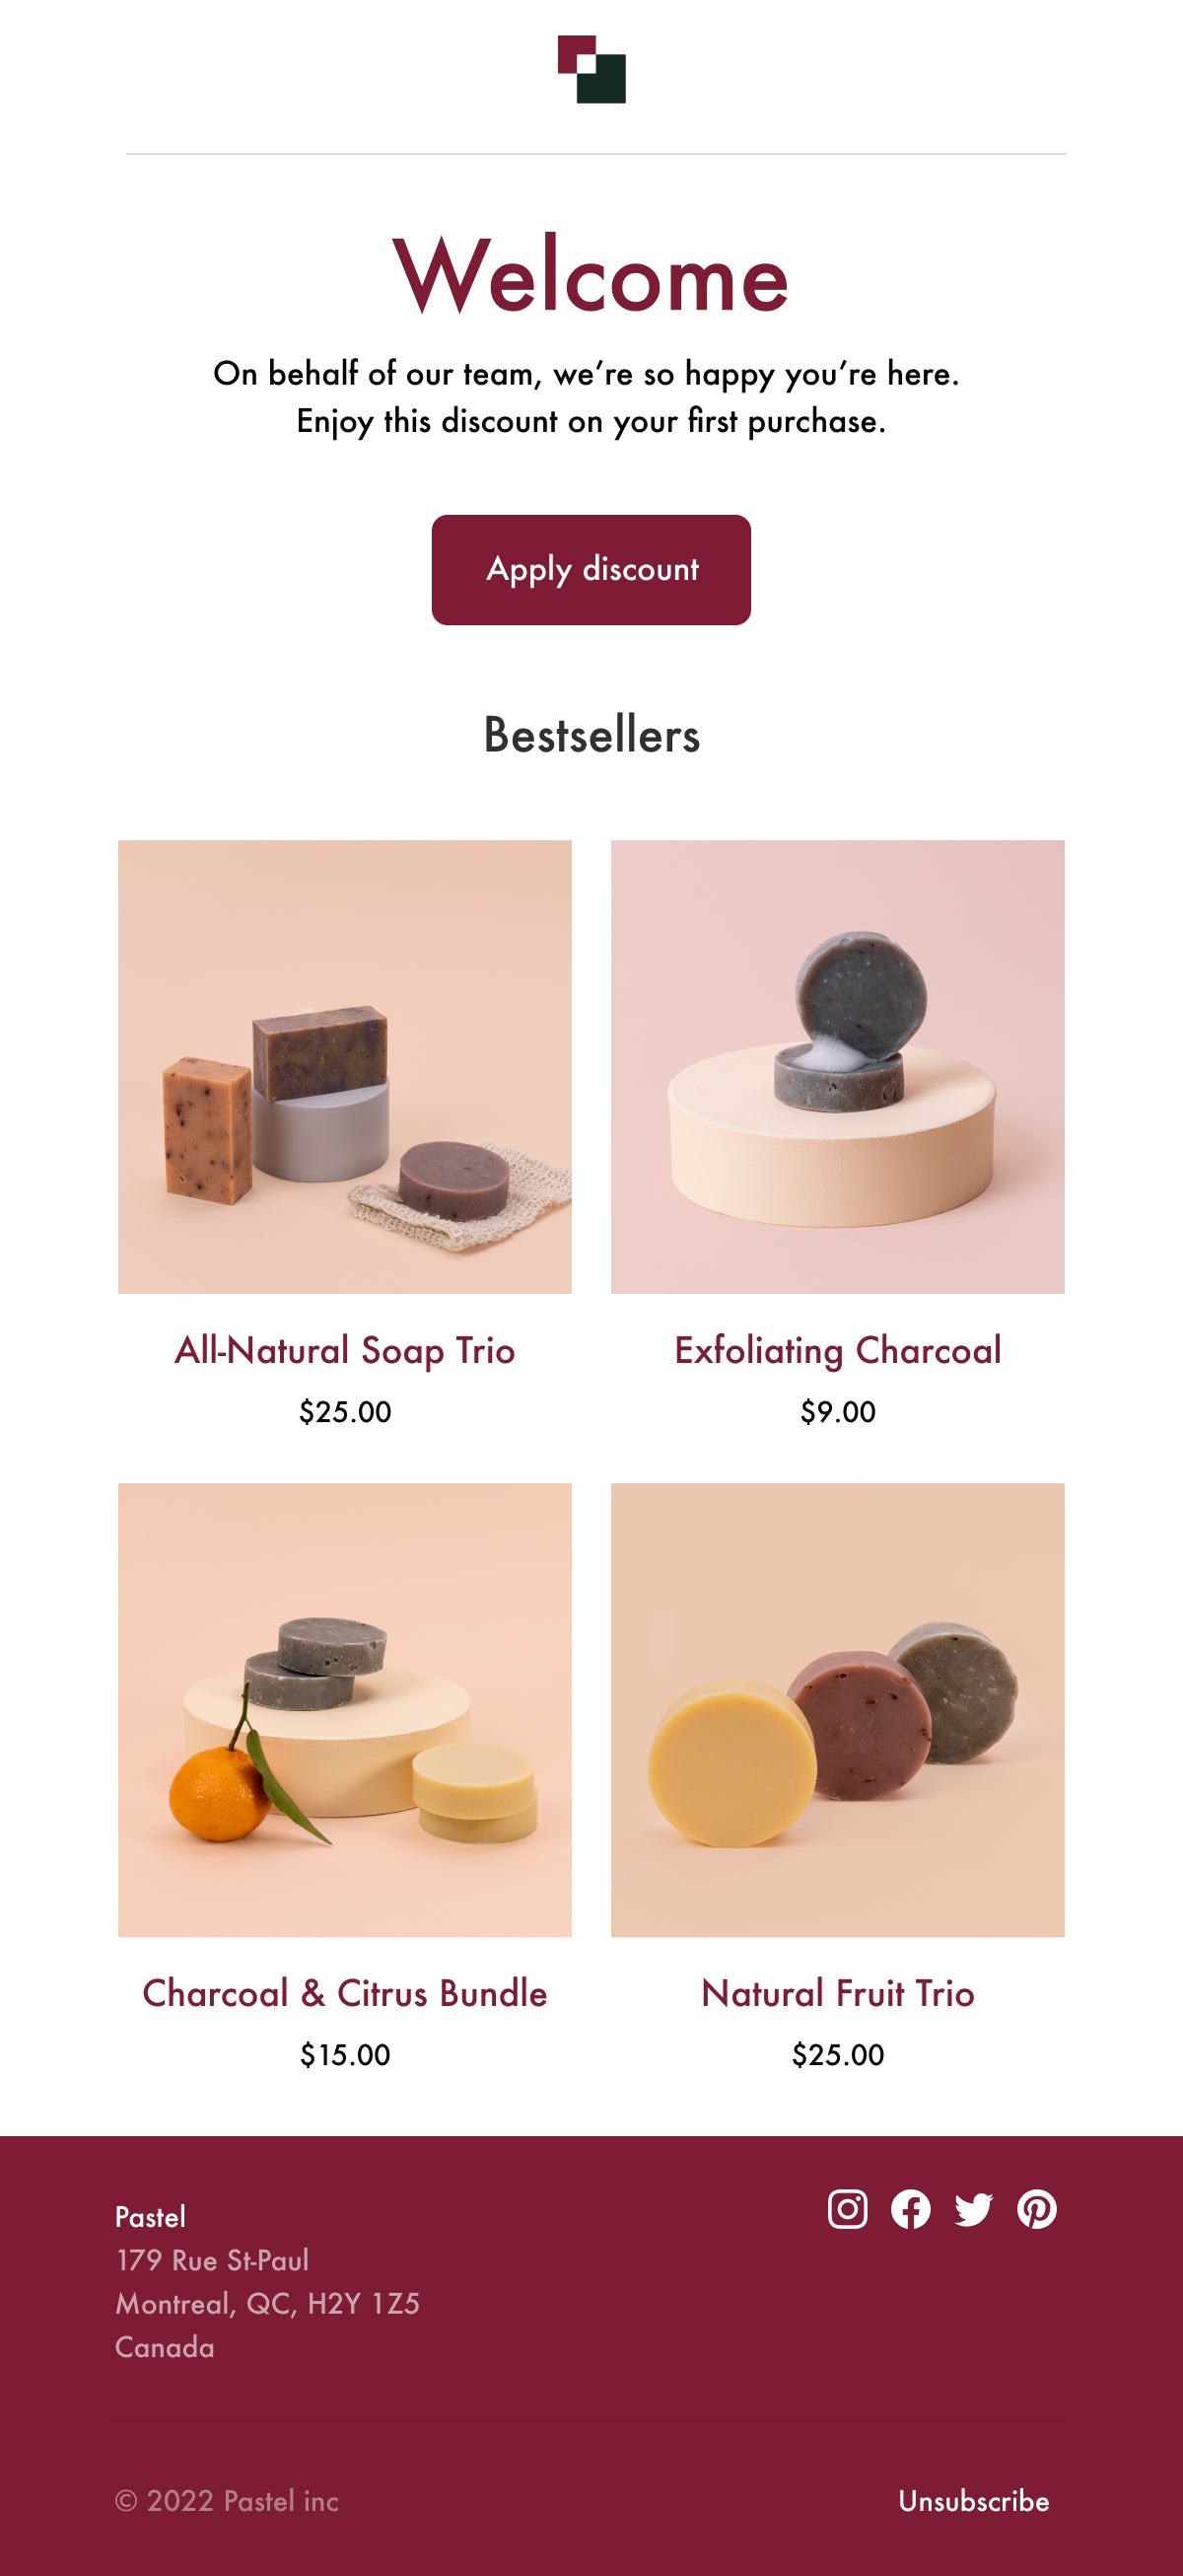 welcome email with a short welcome message, showcasing soap and other bath products in the store